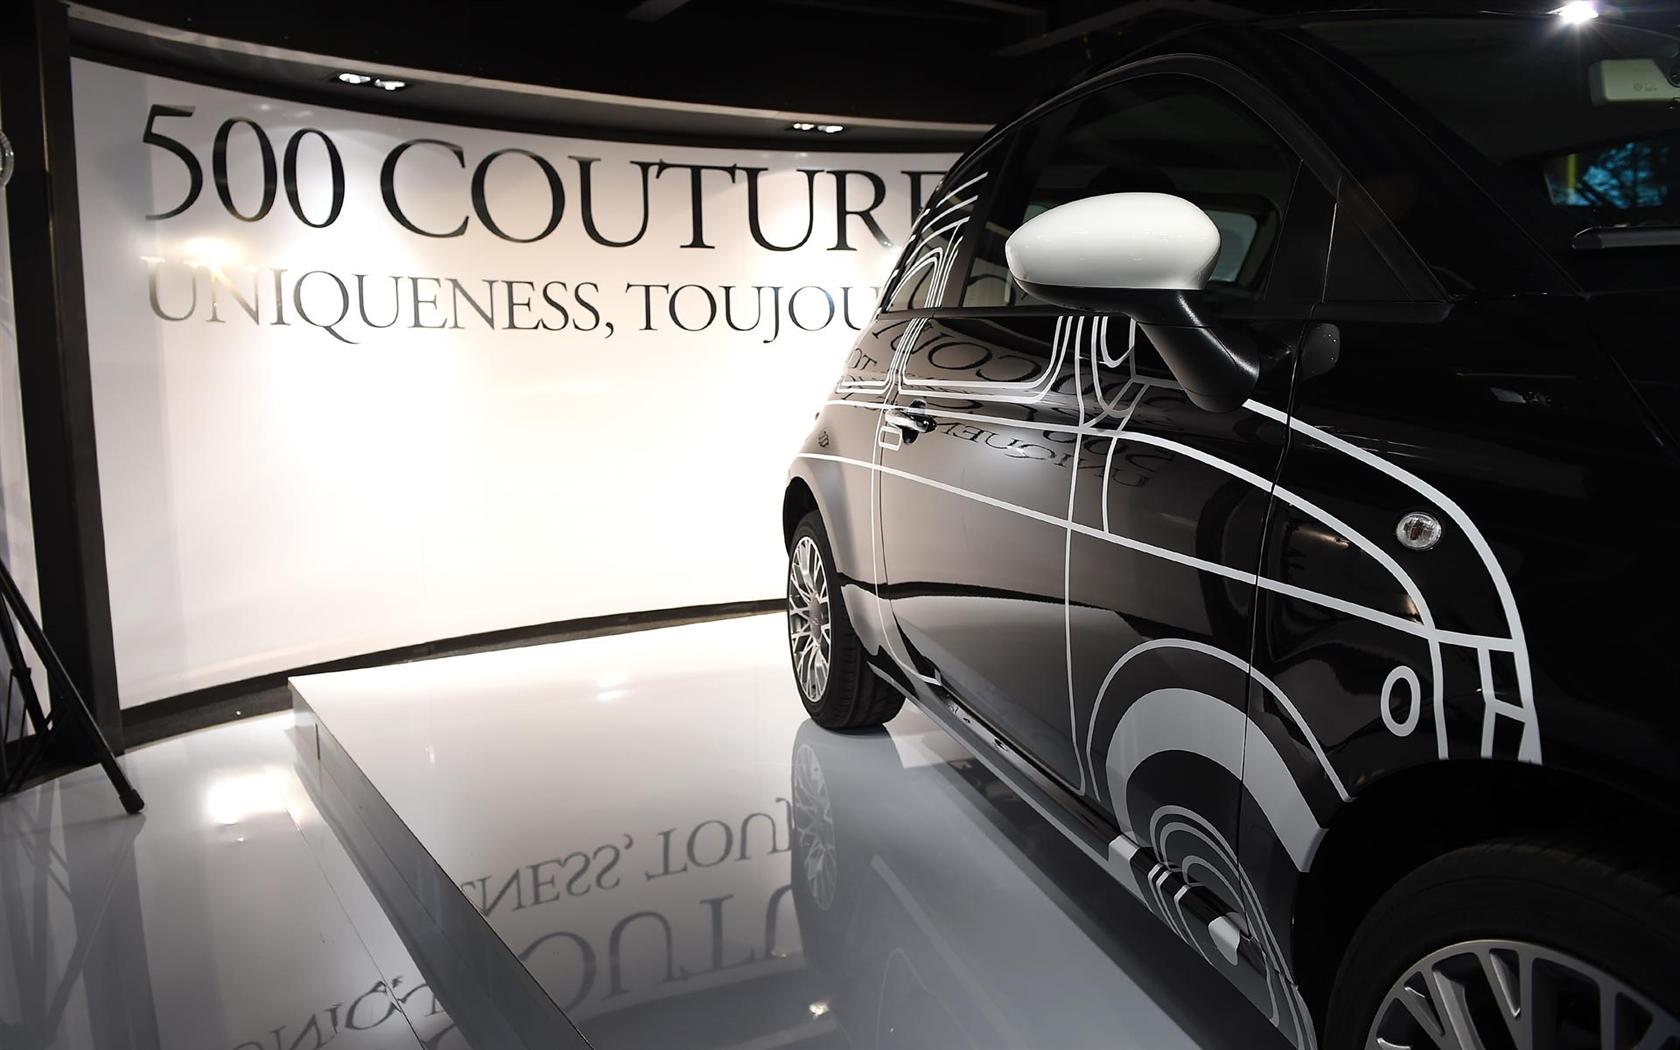 2015 Fiat 500 Couture